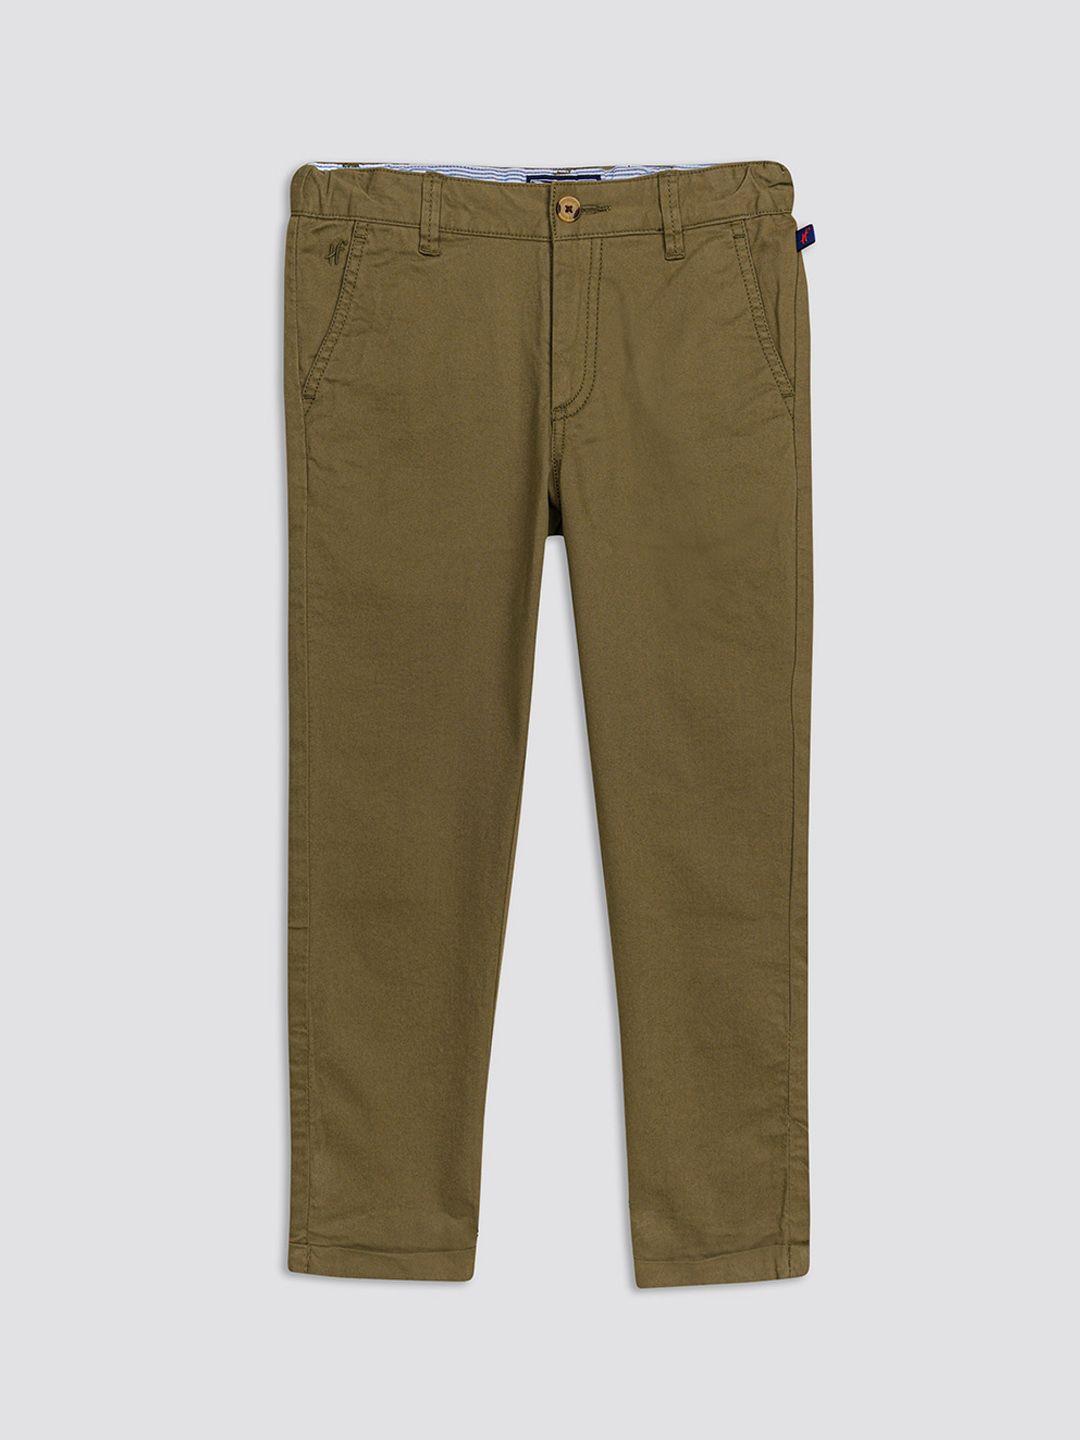 h by hamleys boys mid rise plain cotton chinos